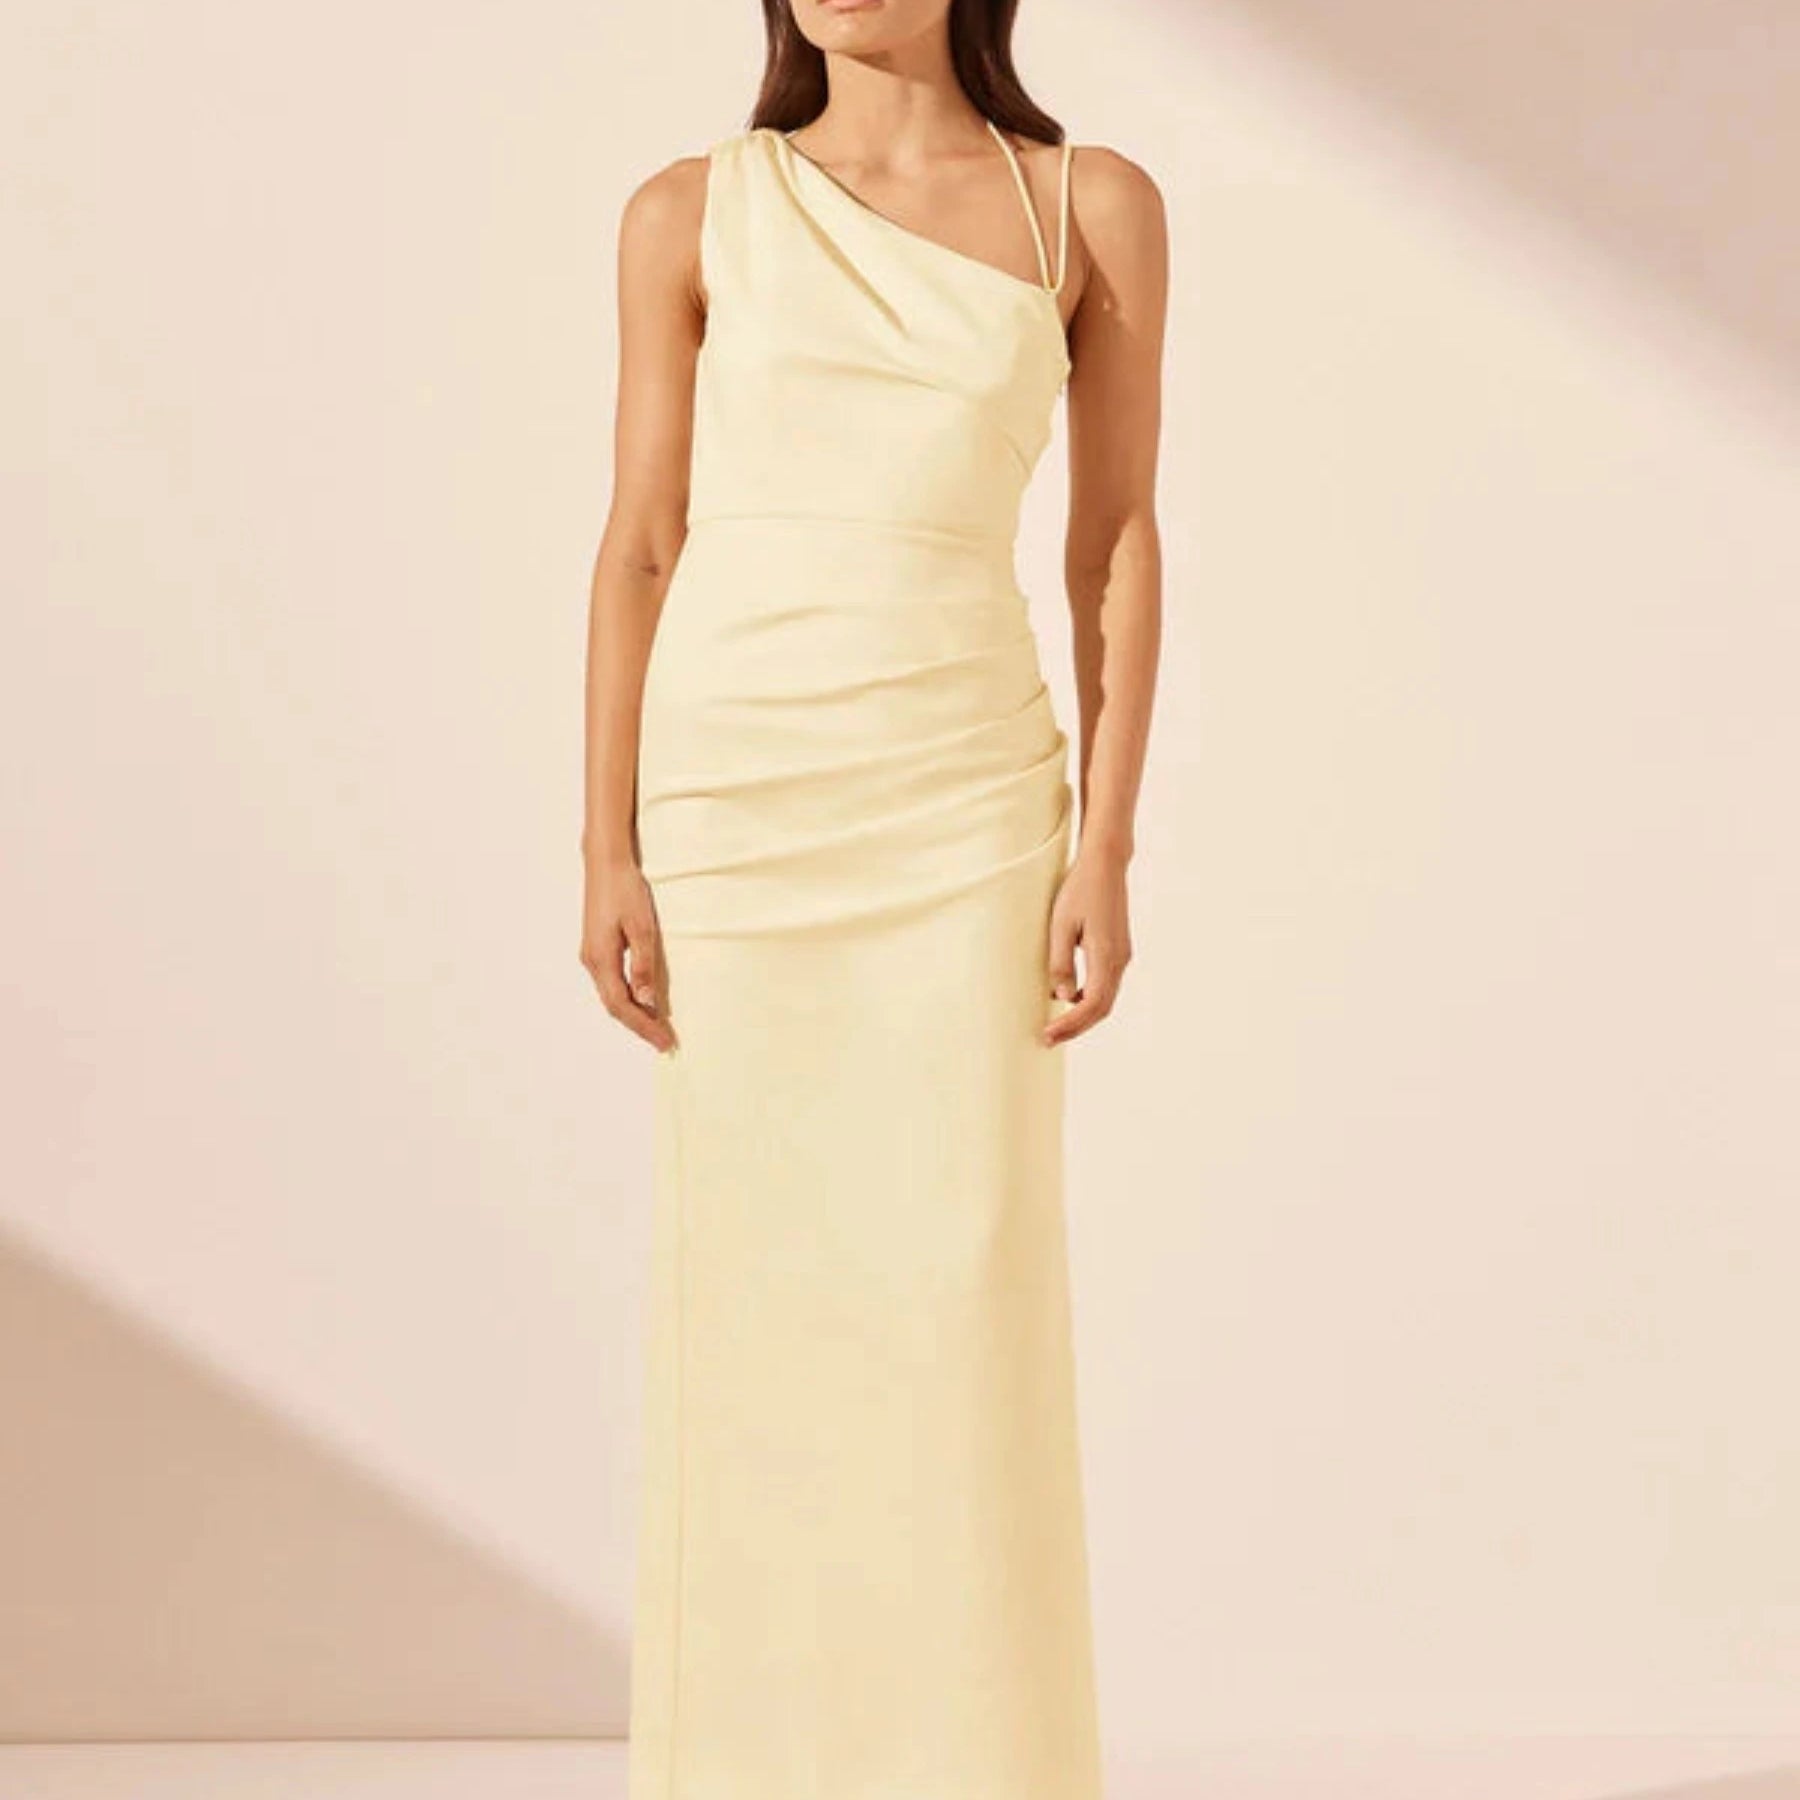 Gathered Dress in vanilla with one shoulder detail